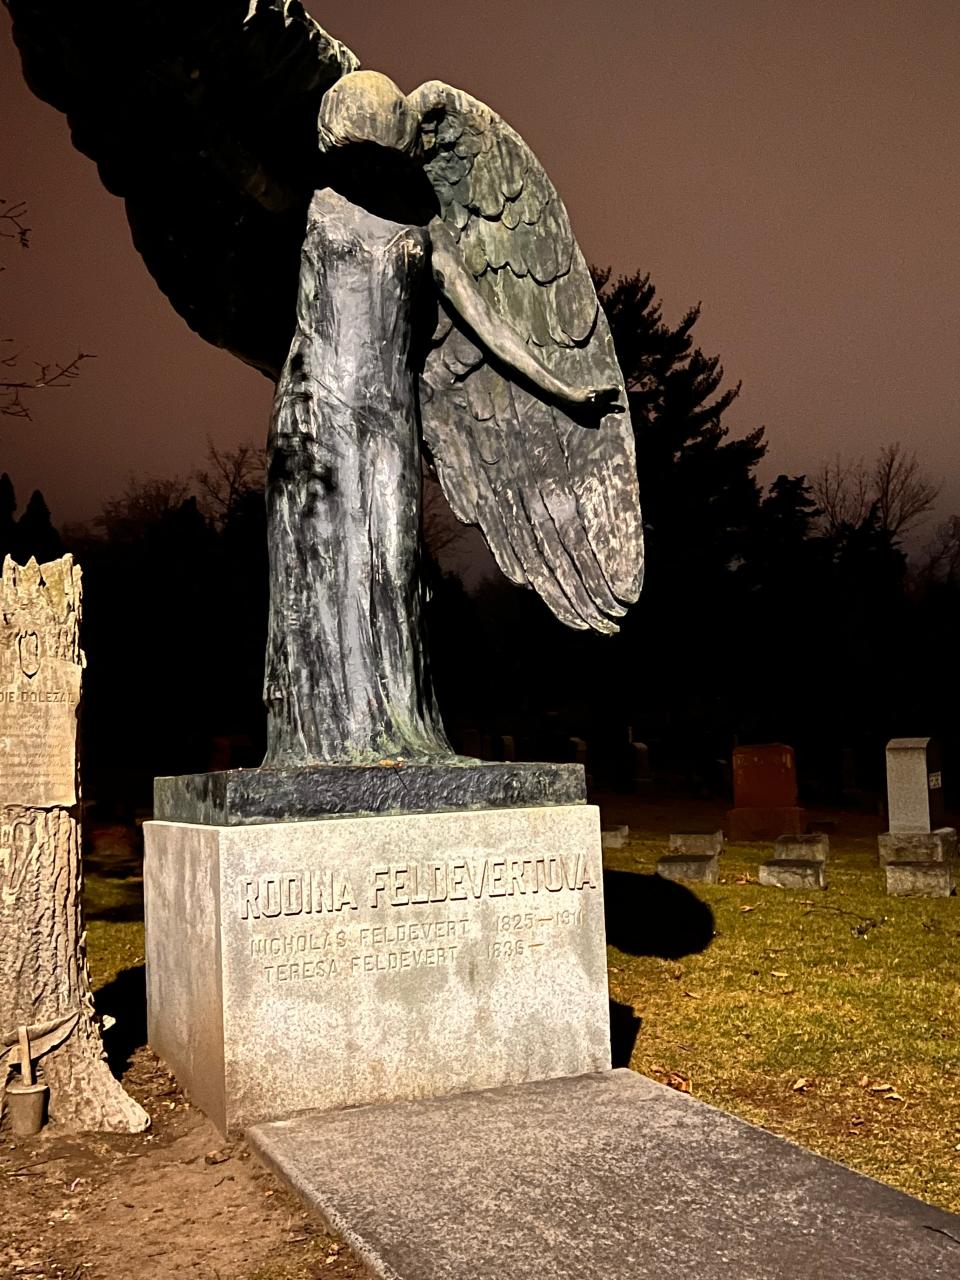 During the winter solstice, we did tarot readings and walked through Oakland Cemetery to see the Black Angel, one of the more underrated Iowa City icons.